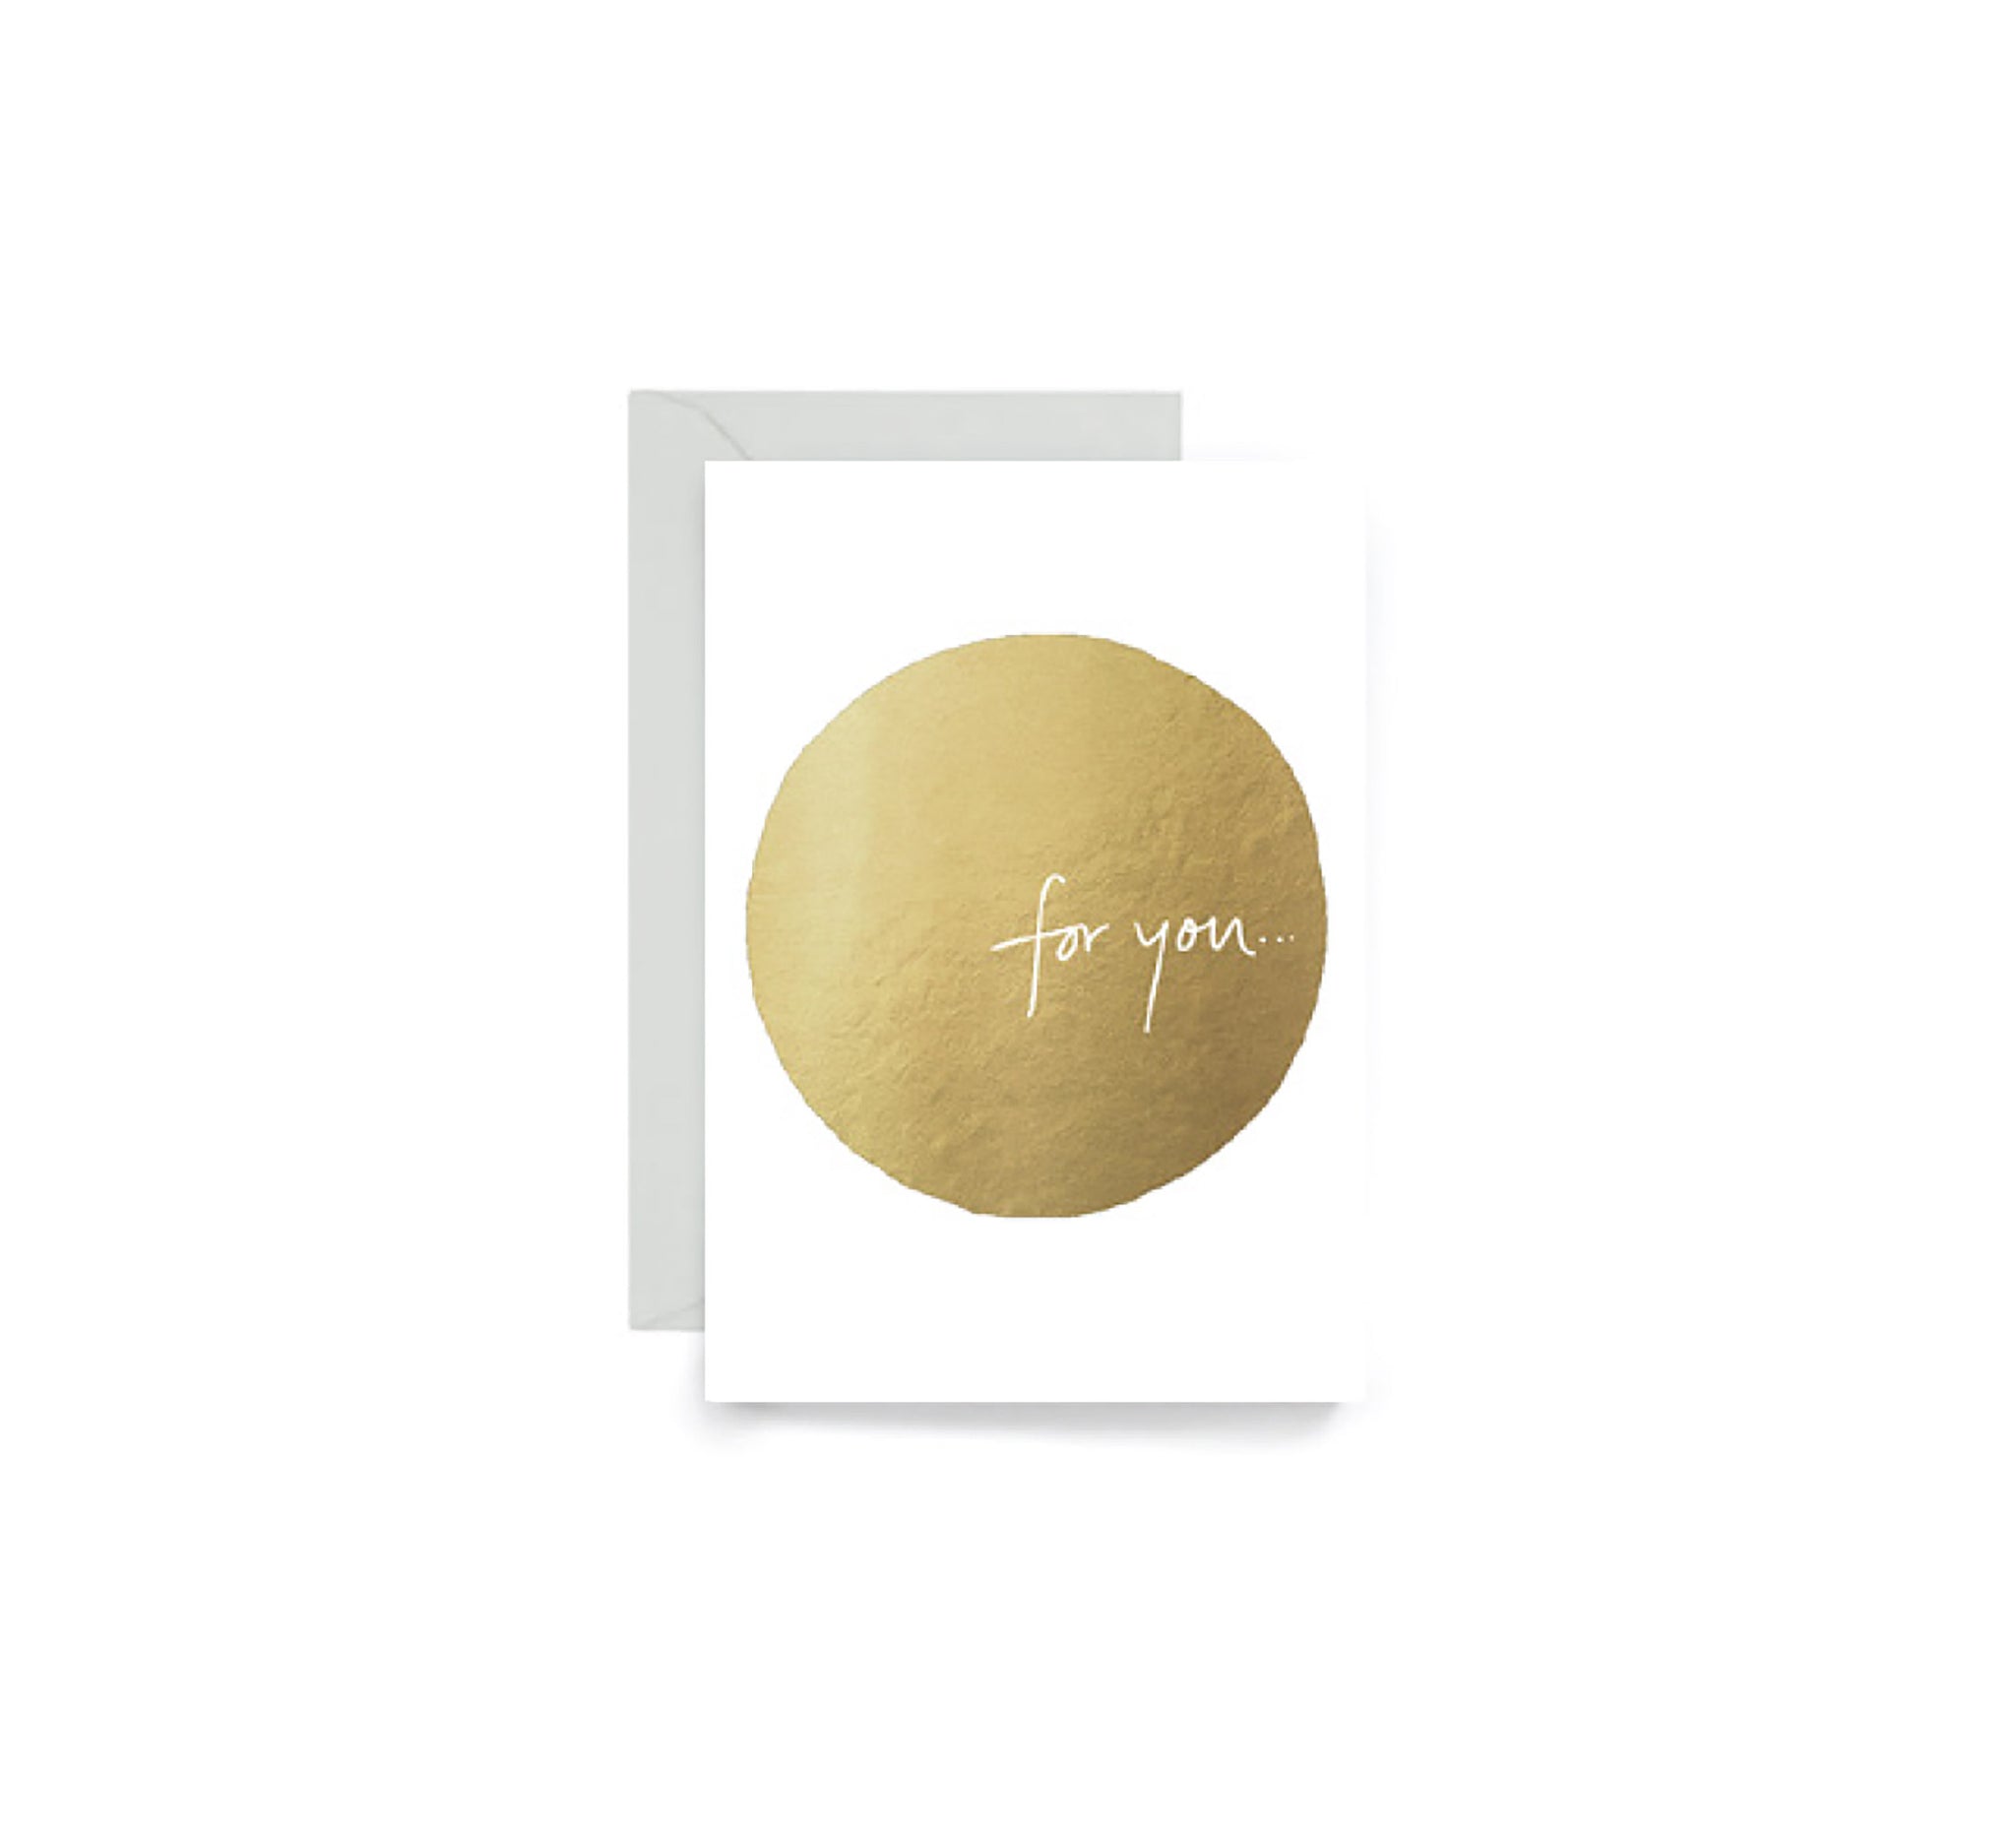 17. FOR YOU CARDS - (PACK OF 6)